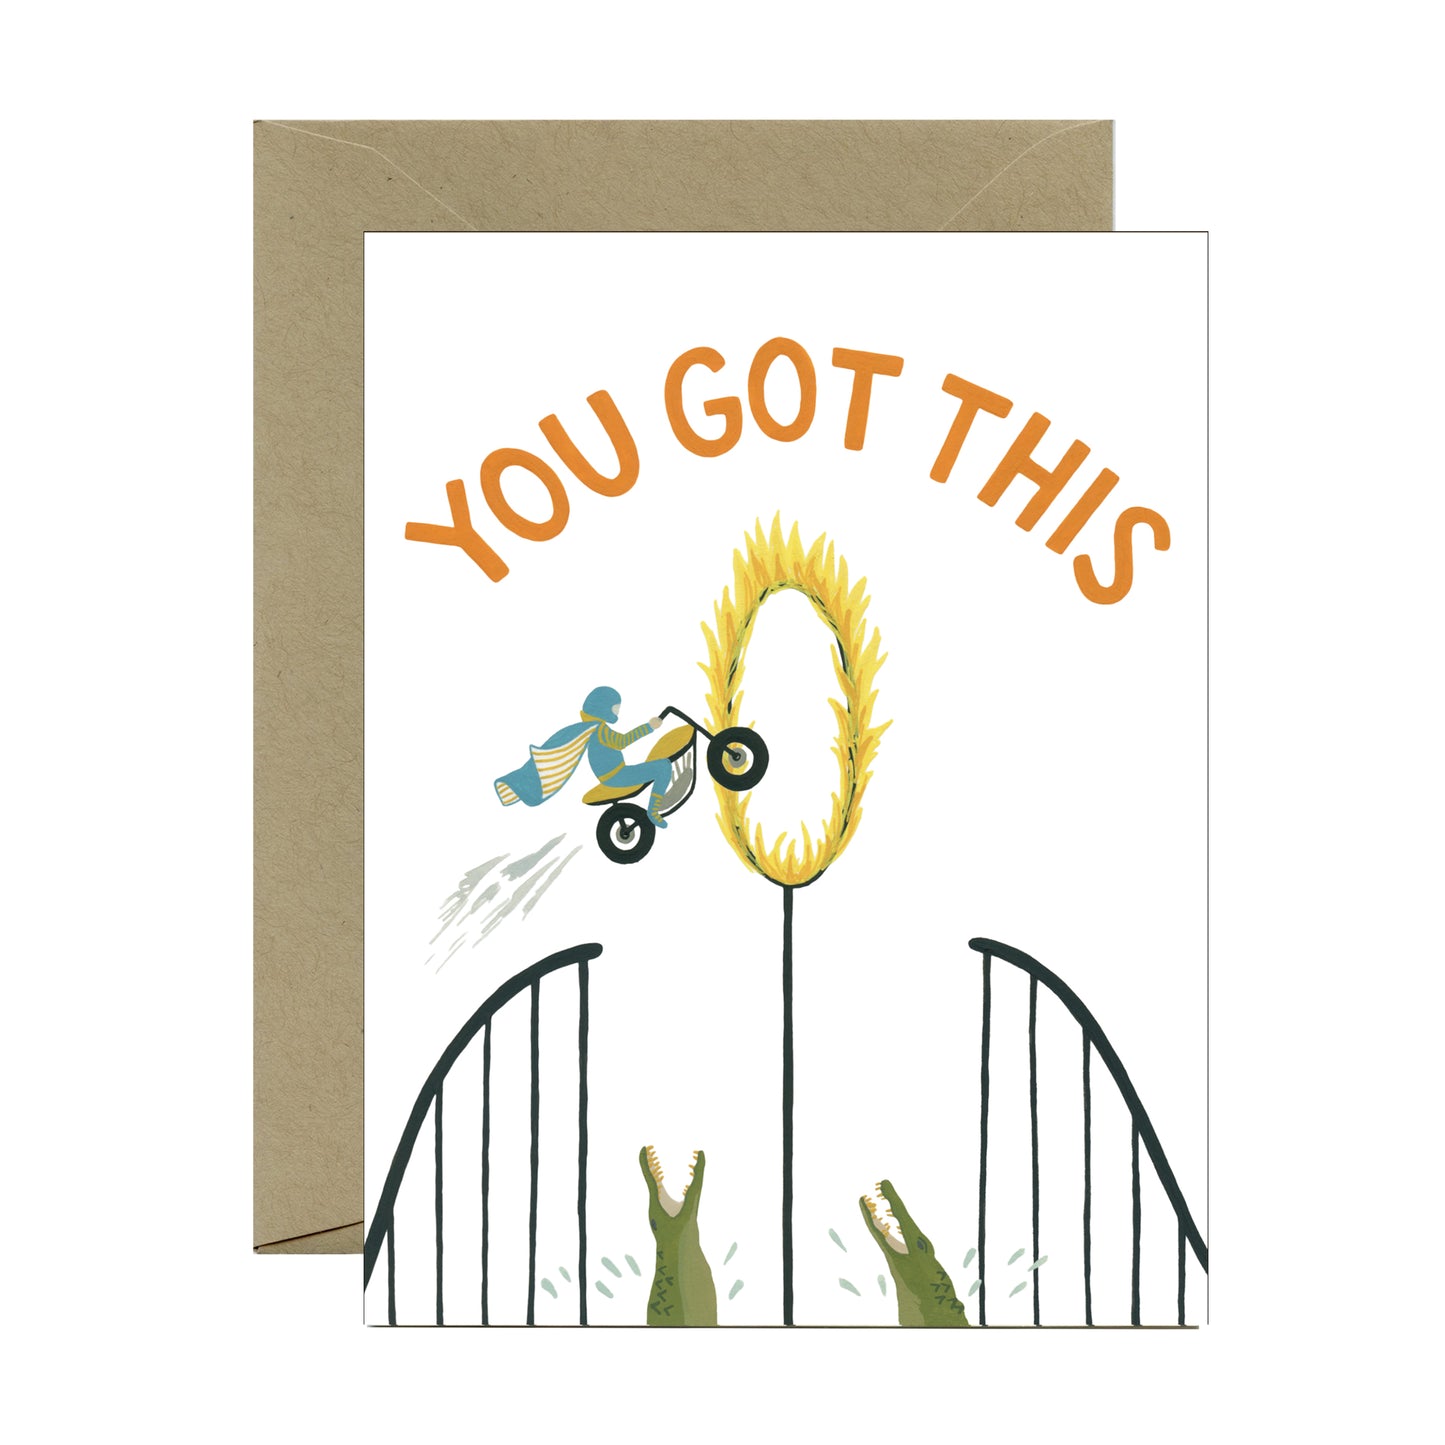 MOTORCYCLE DAREDEVIL THROUGH RING OF FIRE - ENCOURAGEMENT GREETING CARD